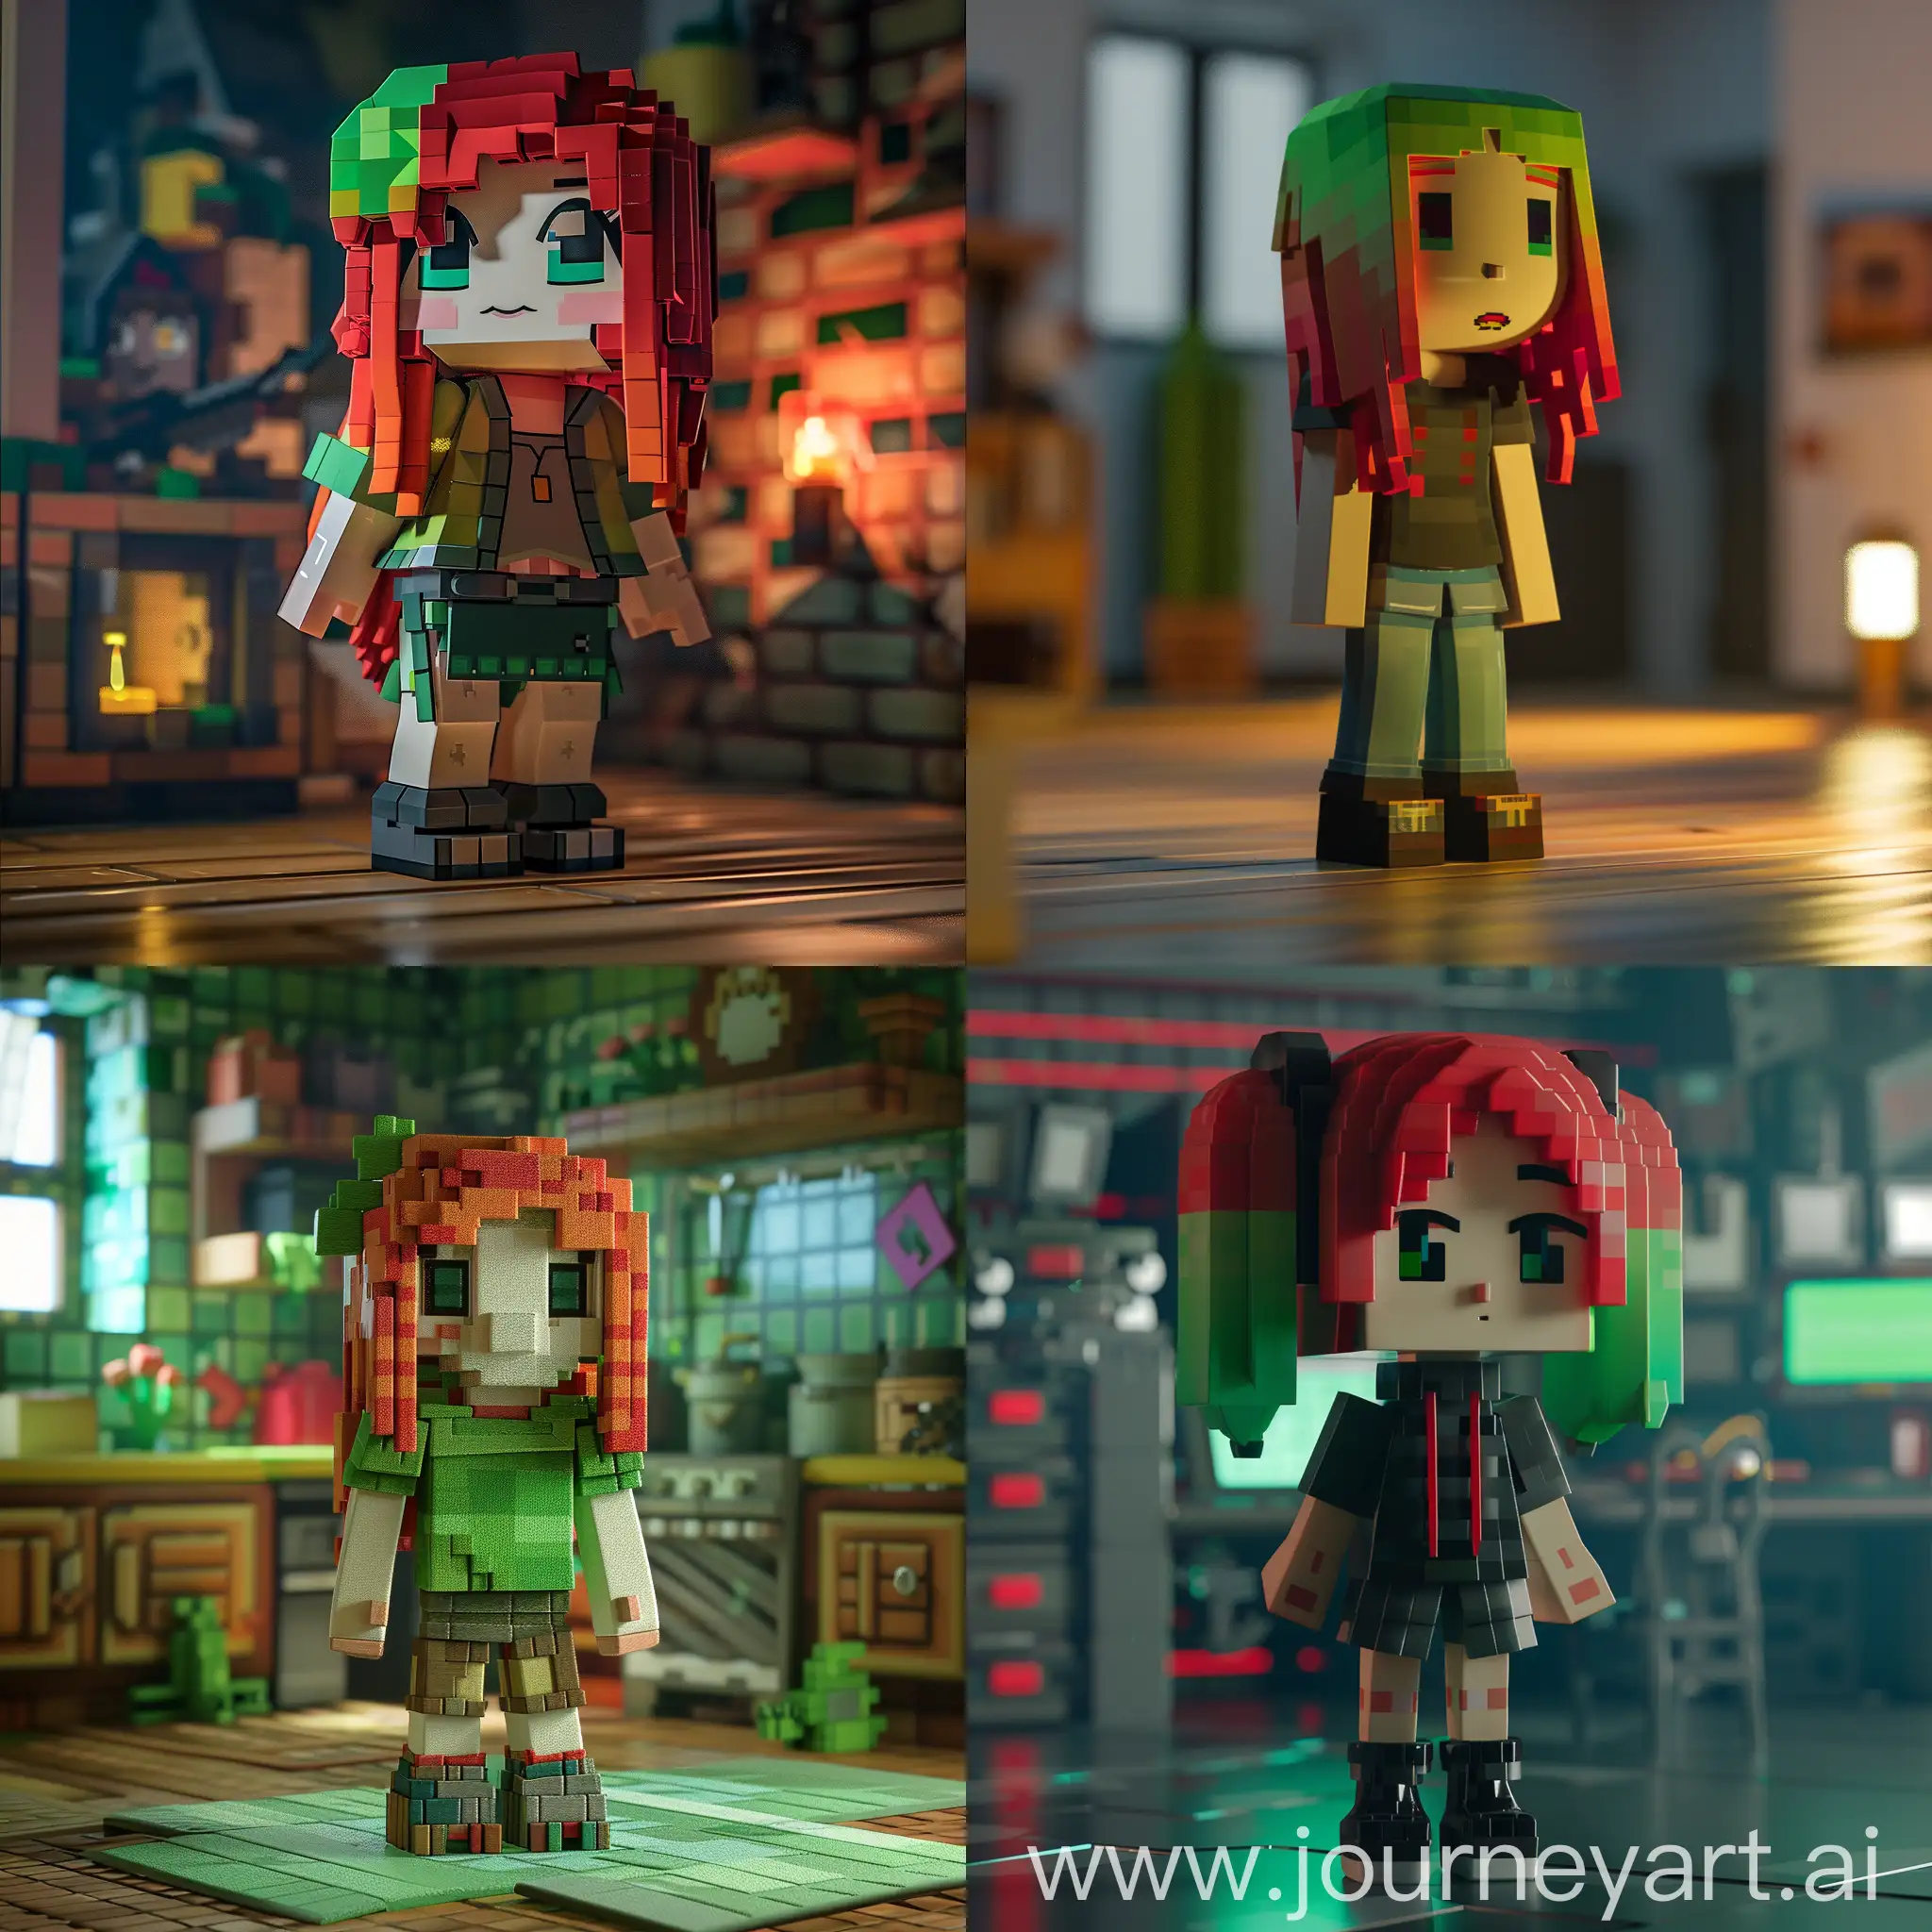 3D-Minecraft-Girl-with-Red-and-Green-Hair-Standing-in-Room